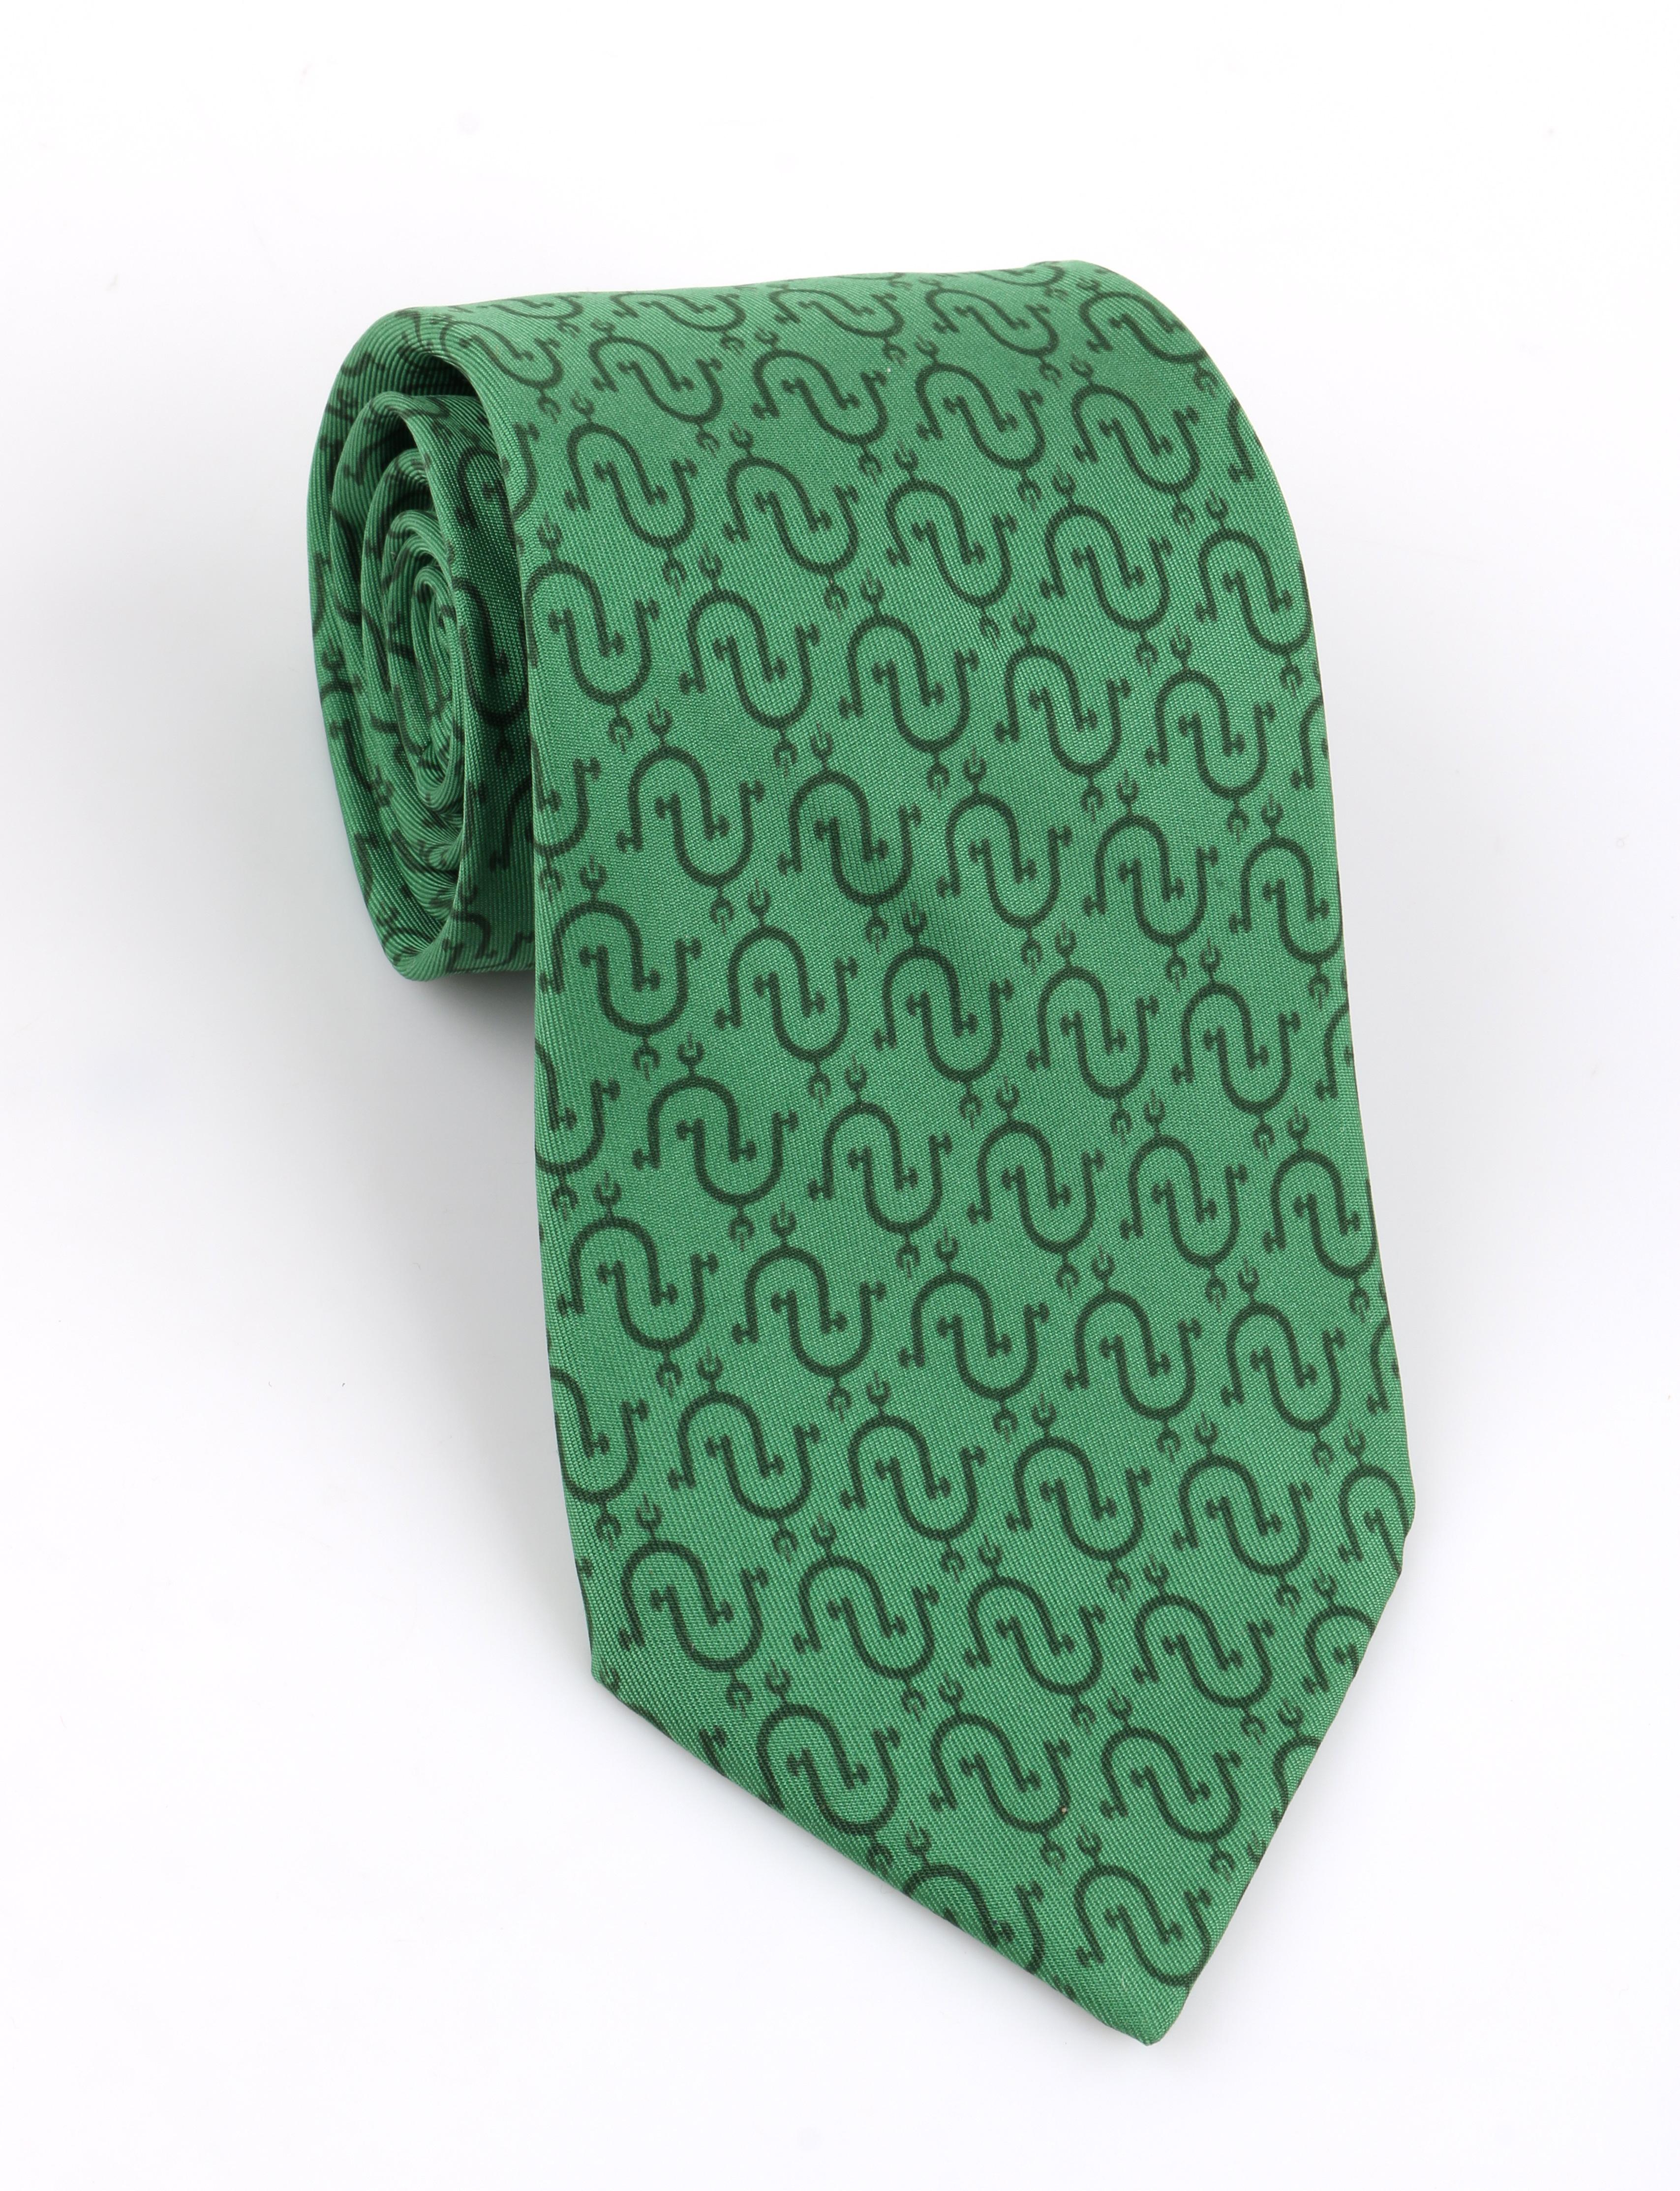 DESCRIPTION: HERMES Kelly Green Equestrian Stirrup Print 5 Fold Silk Necktie Tie 5202 IA
 
Brand / Manufacturer: Hermes
Style: Necktie
Color(s): Shades of green
Lined: Yes
Marked Fabric Content: 100% Silk
Additional Details / Inclusions: Dark green